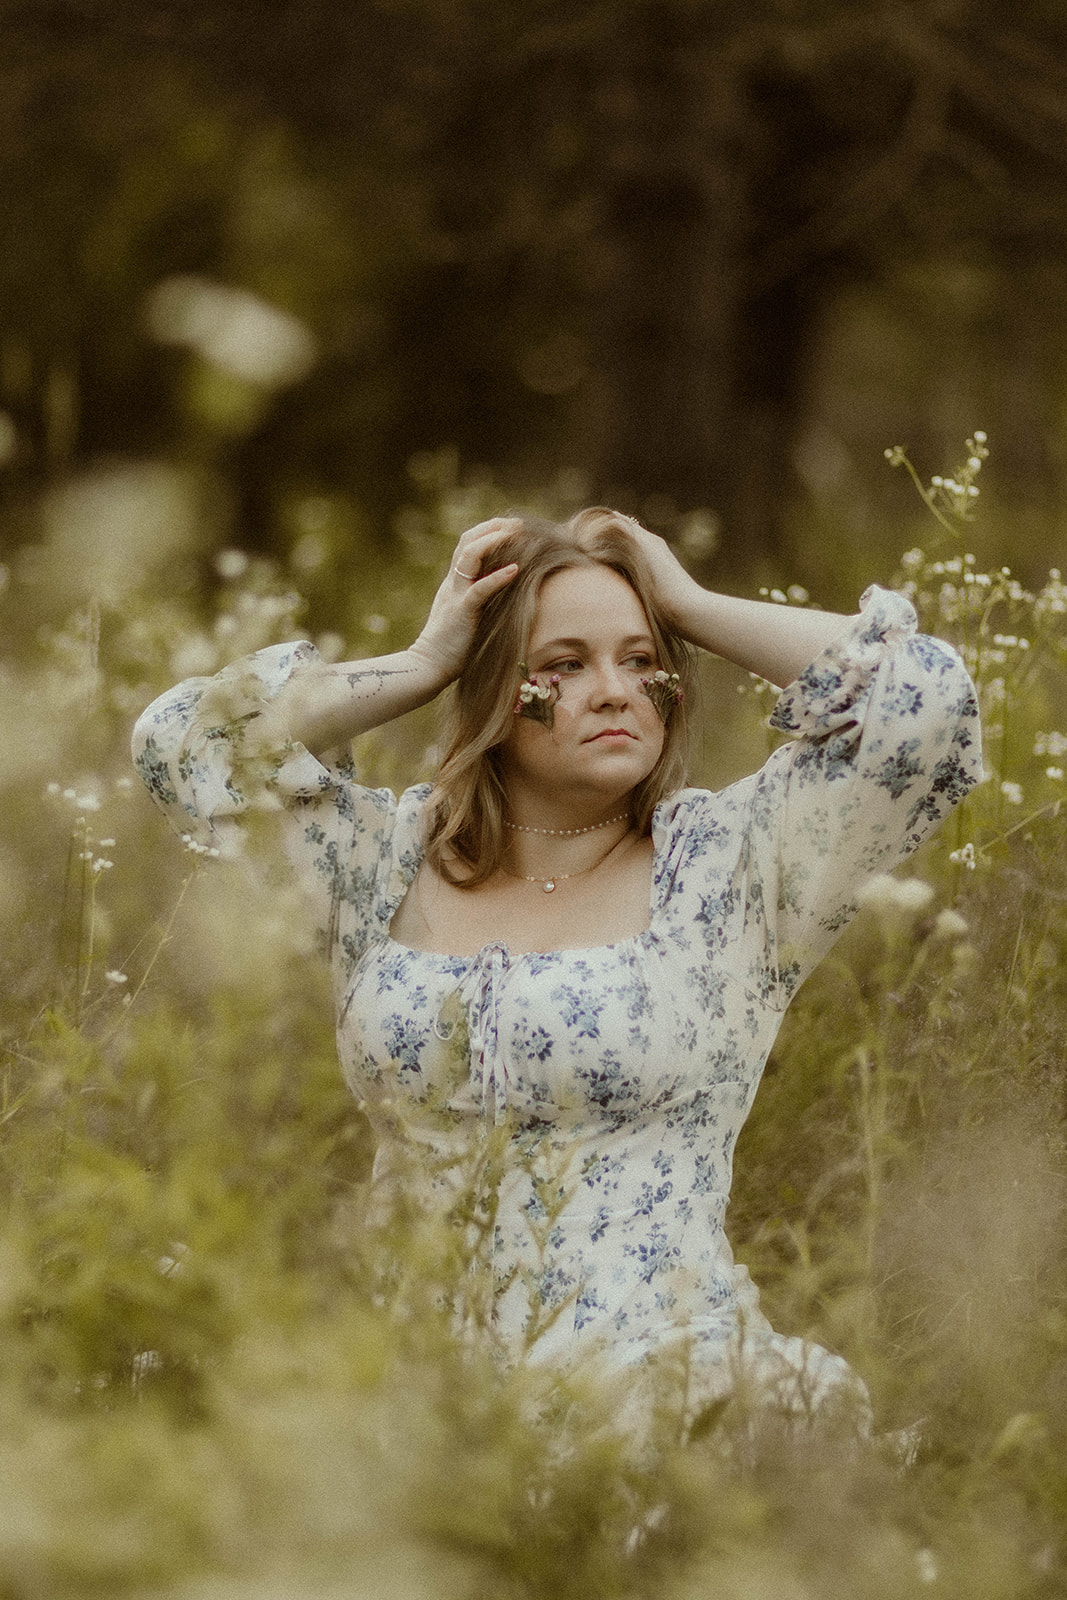 stunning young lady takes creative self portraits in a wildflower field